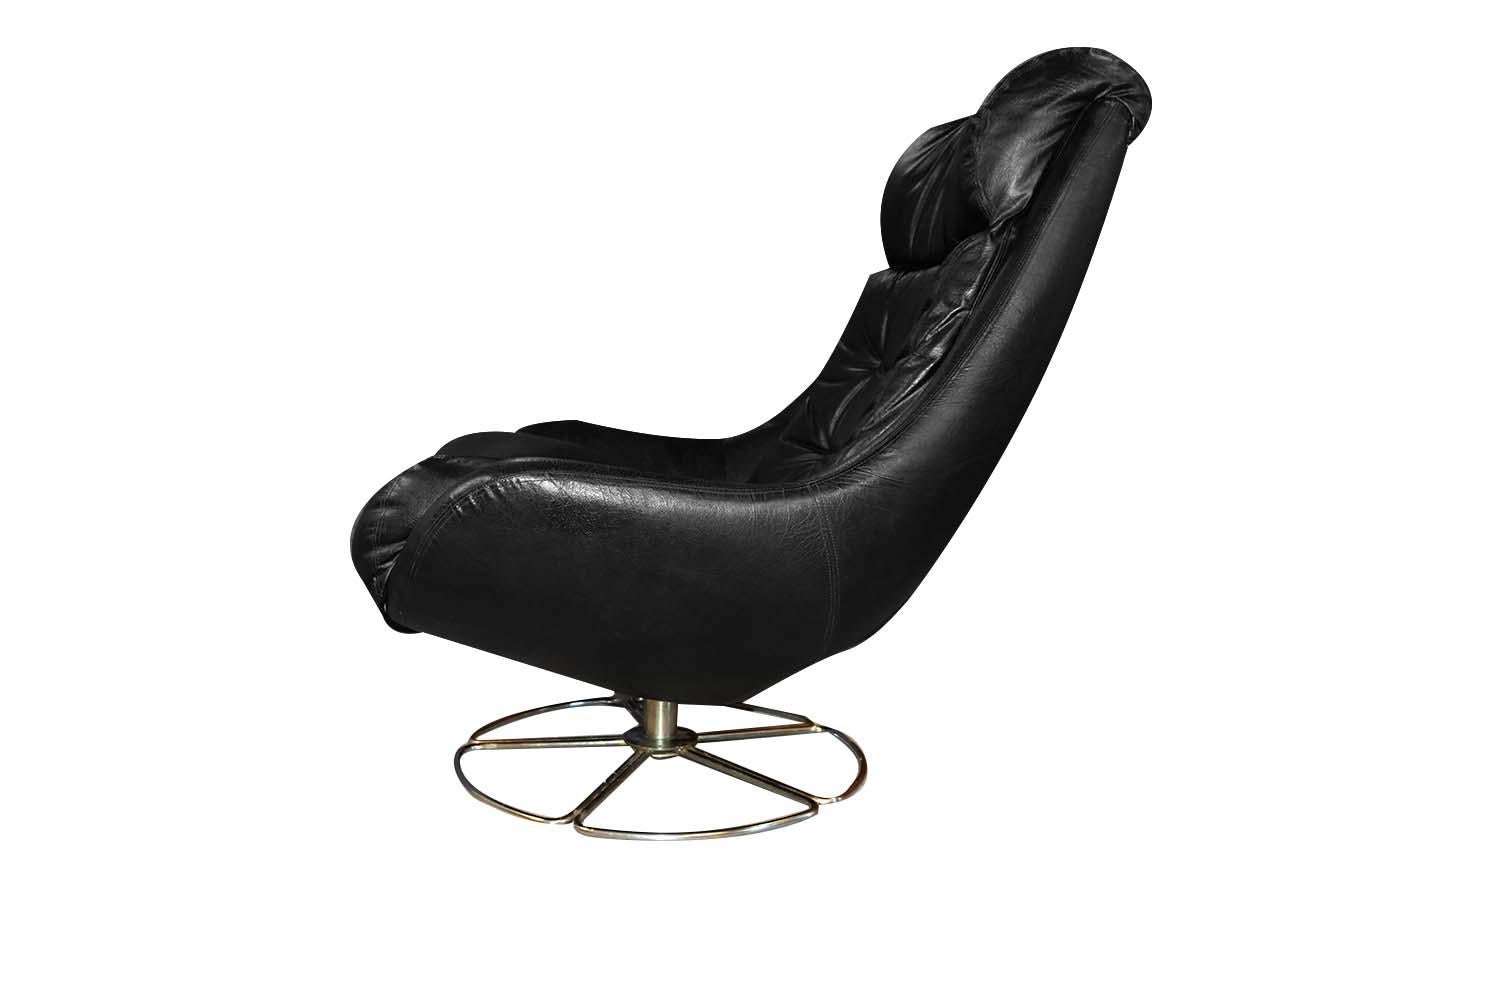 Fantastic midcentury, overman style, pod, high back, swivel, lounge chair, circa 1970s. Featuring a generously padded, high back and headrest to ensure maximum comfort and support. Upholstered in handsome, tufted, rich black, original, faux leather.